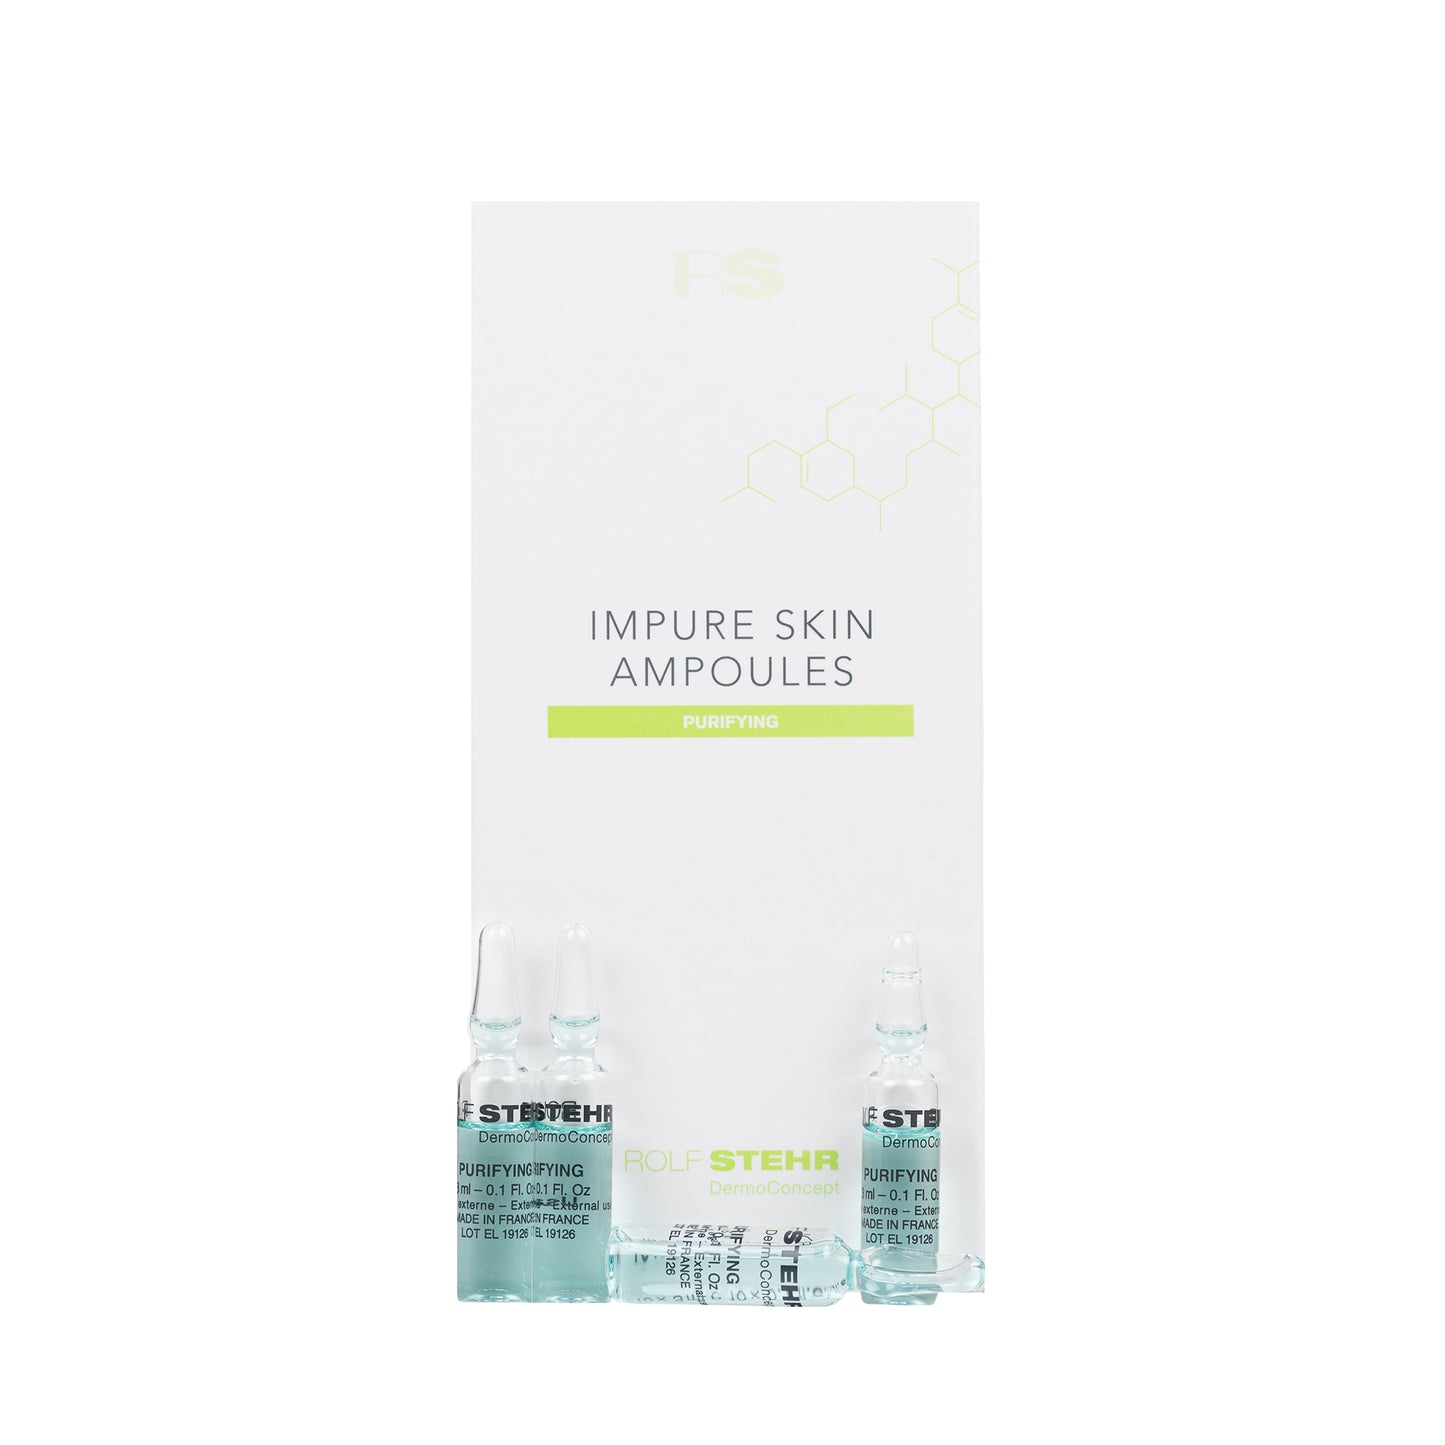 Ampoules Purifying KABINE <br> Impure Skin